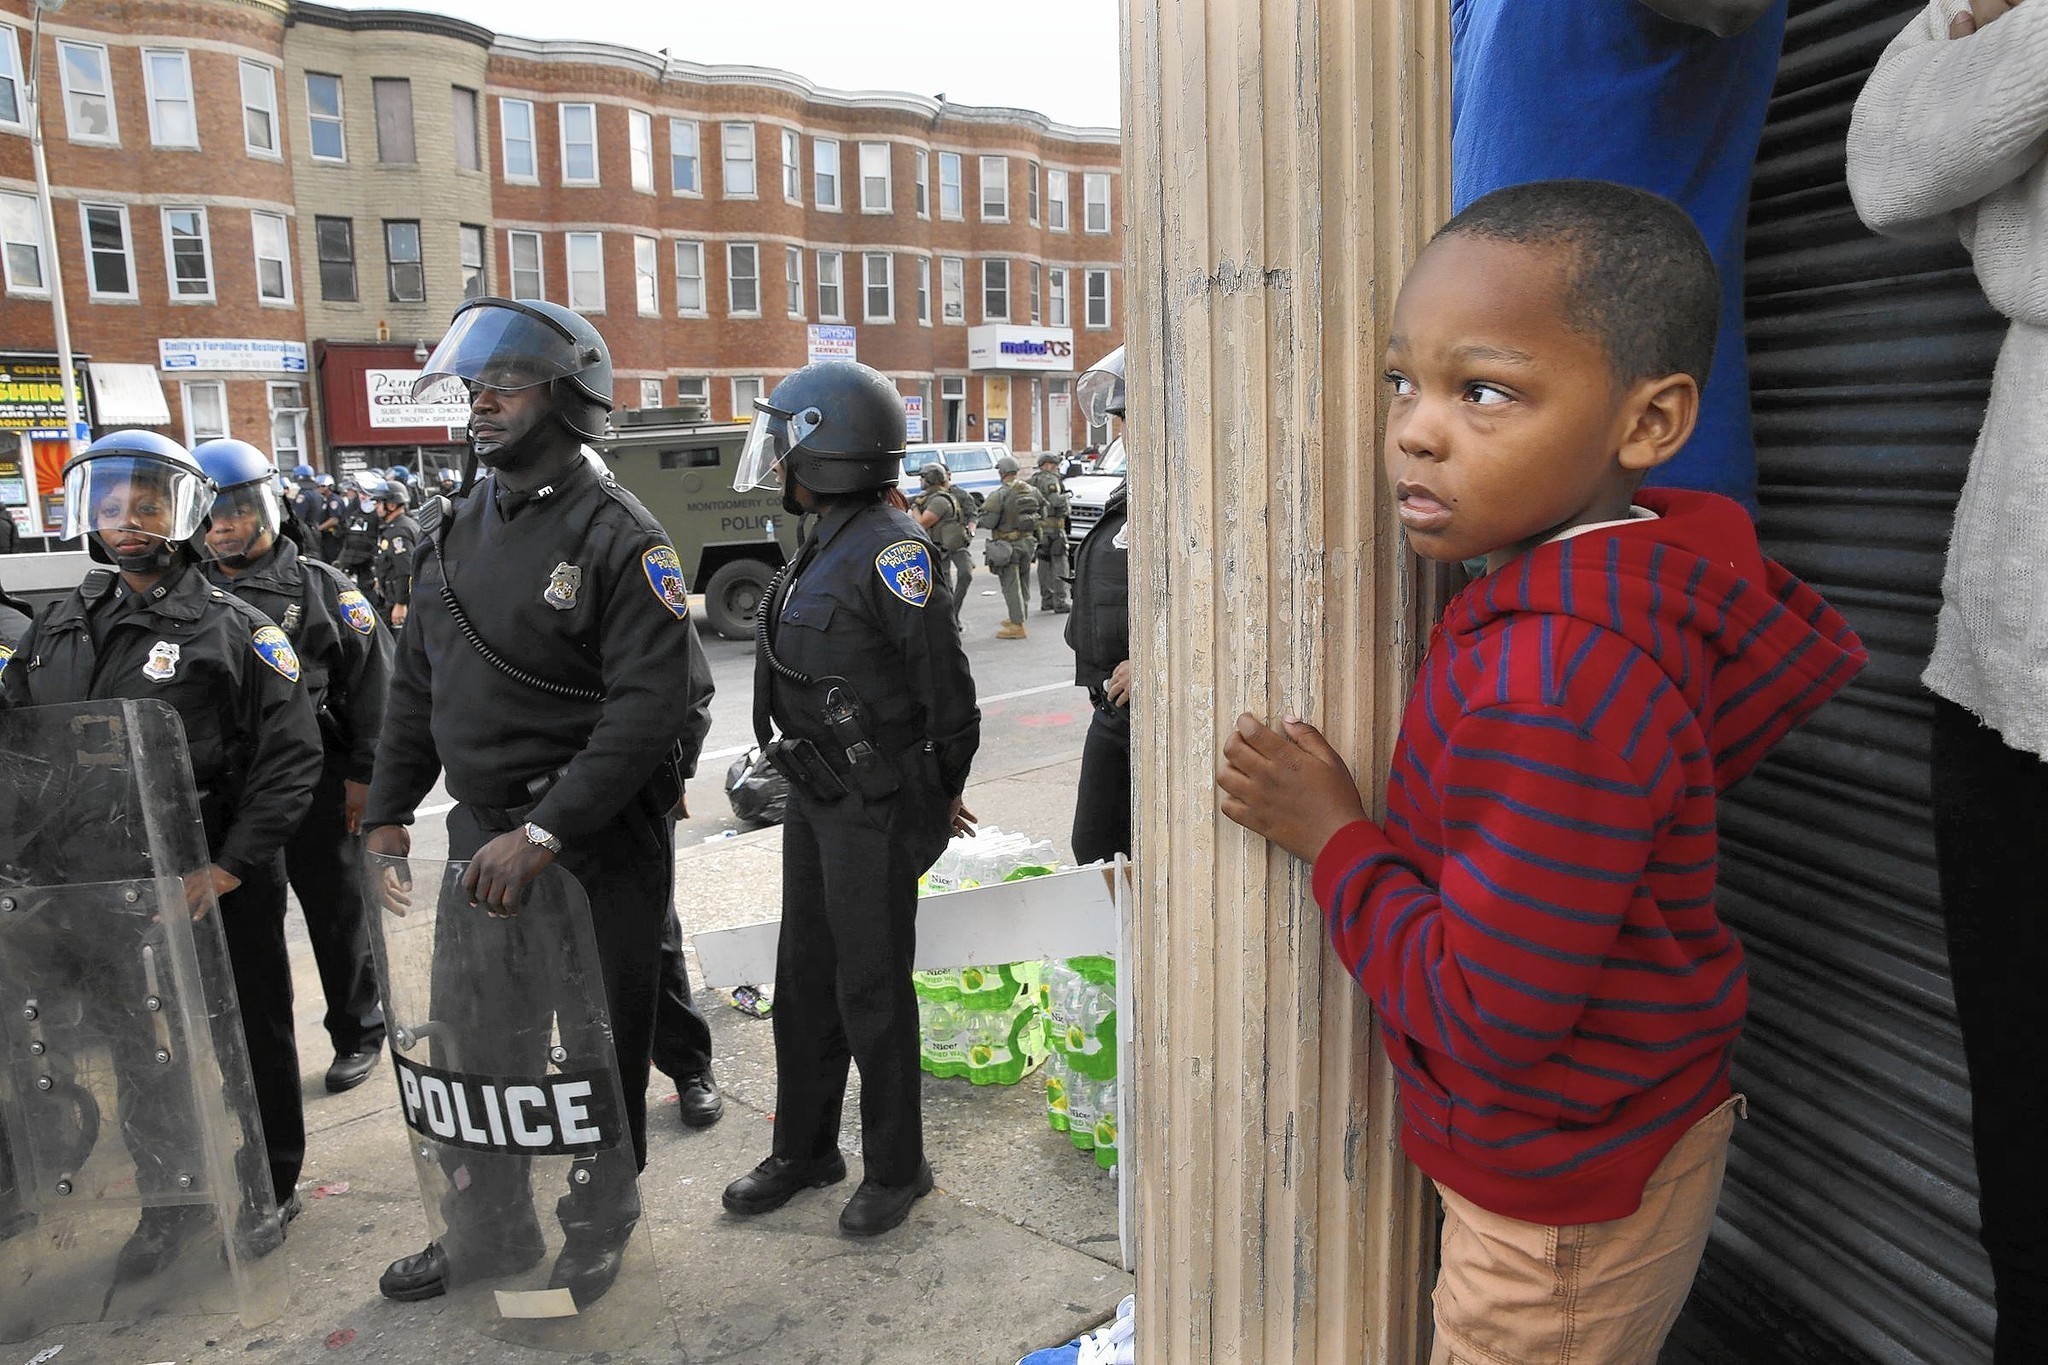 Baltimore police illegally detained many protesters, public.